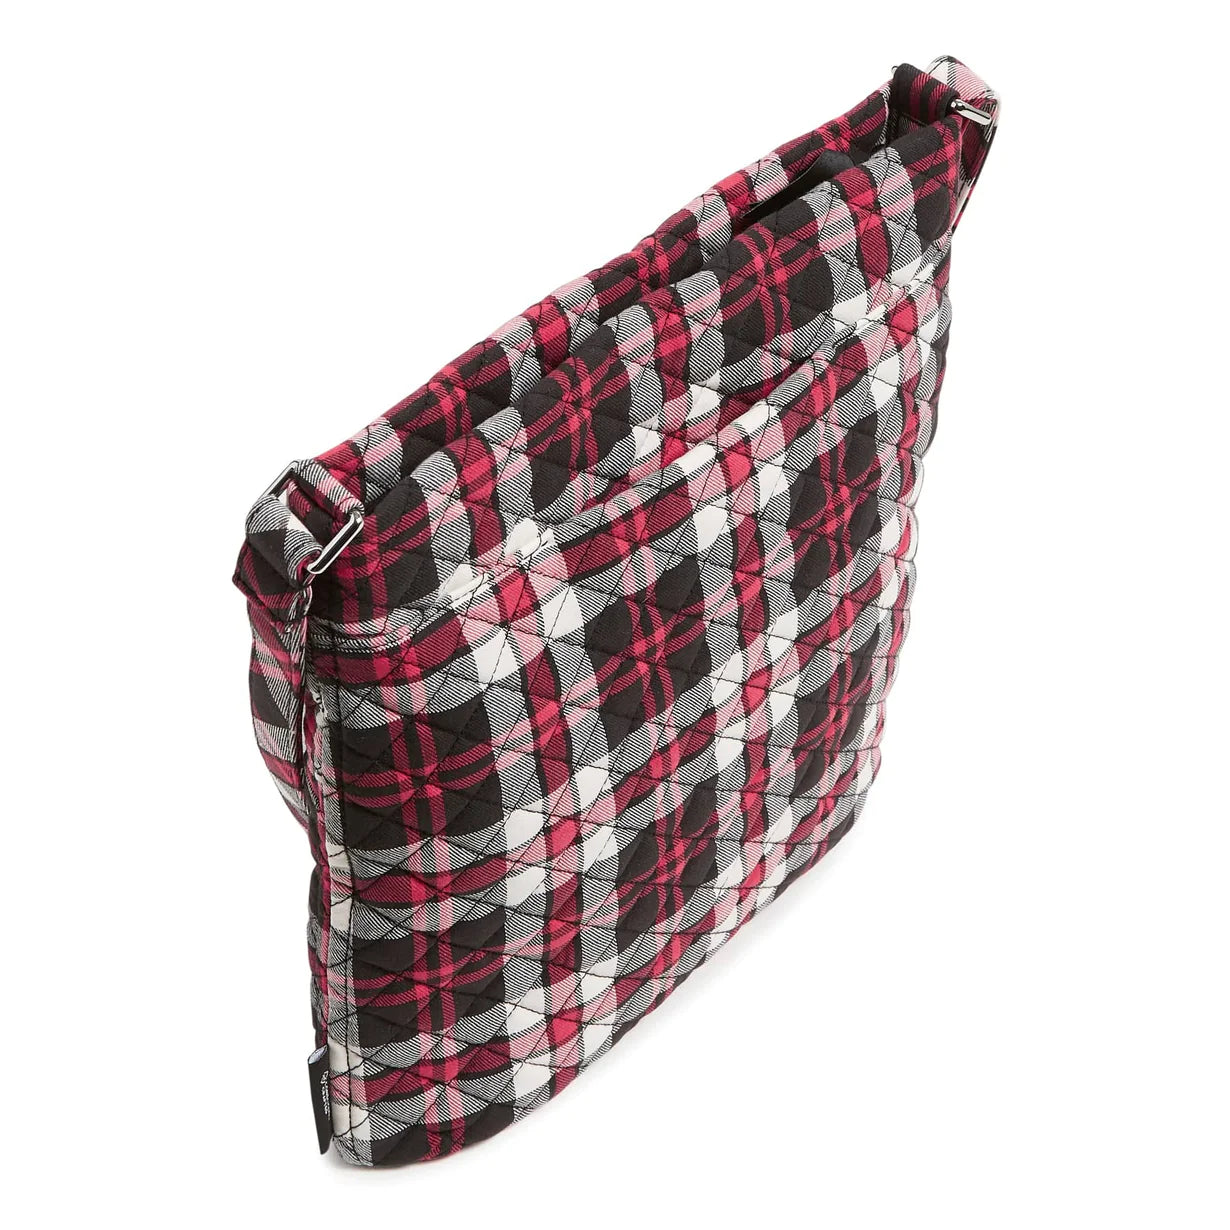 Triple Zip Hipster - Fireplace Plaid